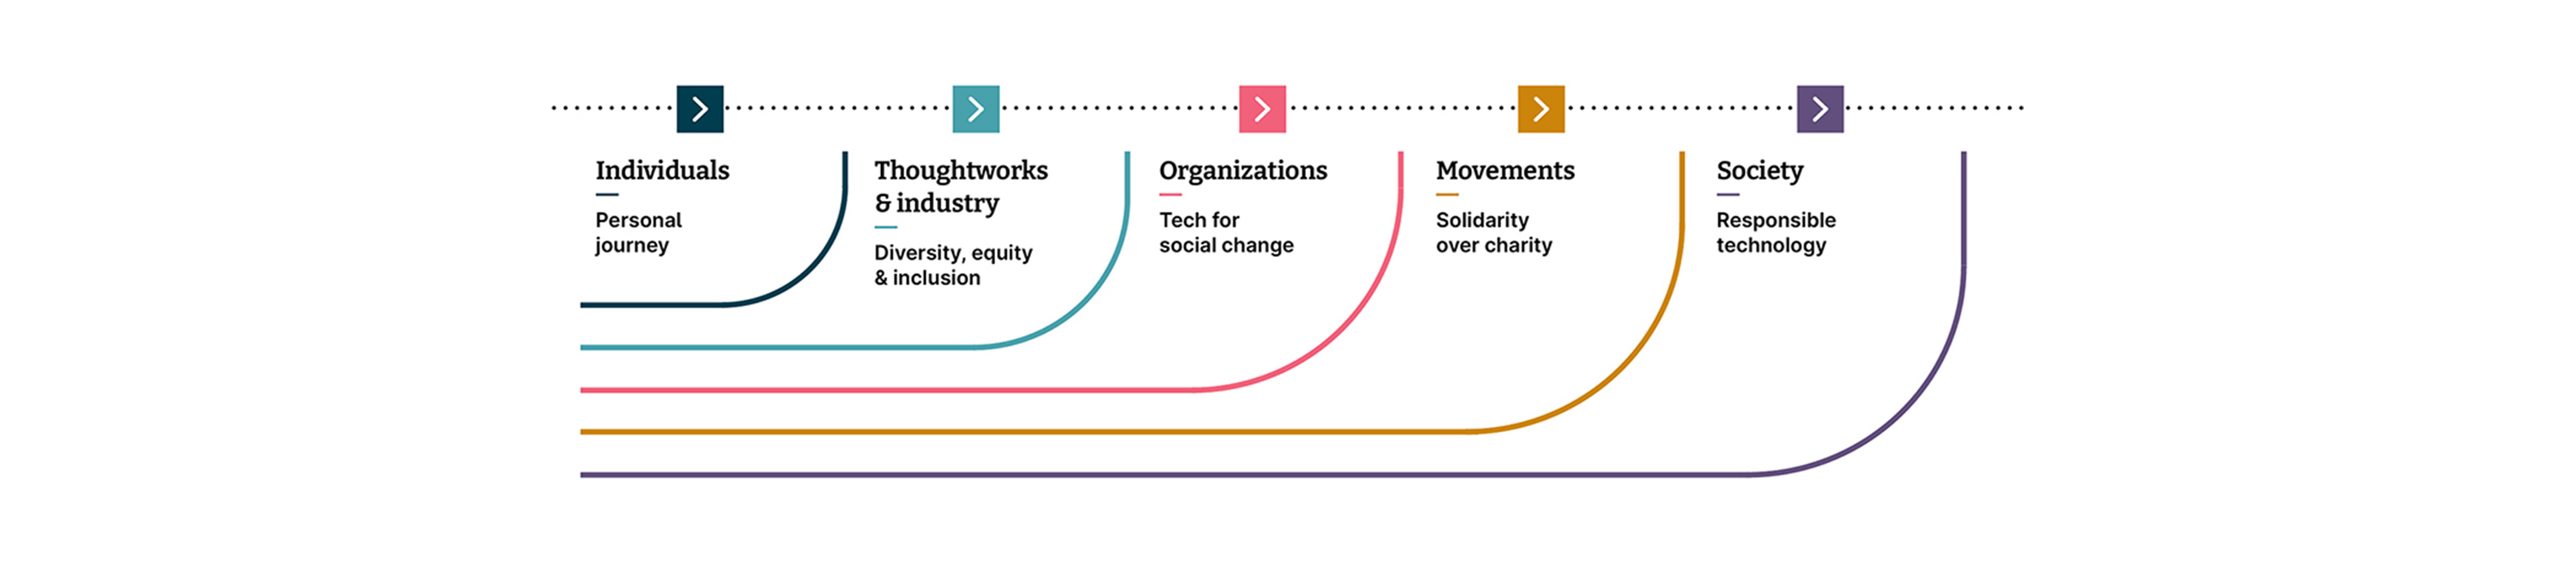 The social change framework: a layered diagram showing Individuals (the personal journey); Thoughtworks and industry (diversity, equity and inclusion); Organizations (tech for social change);  Movements (solidarity over charity); and Society (responsible technology)